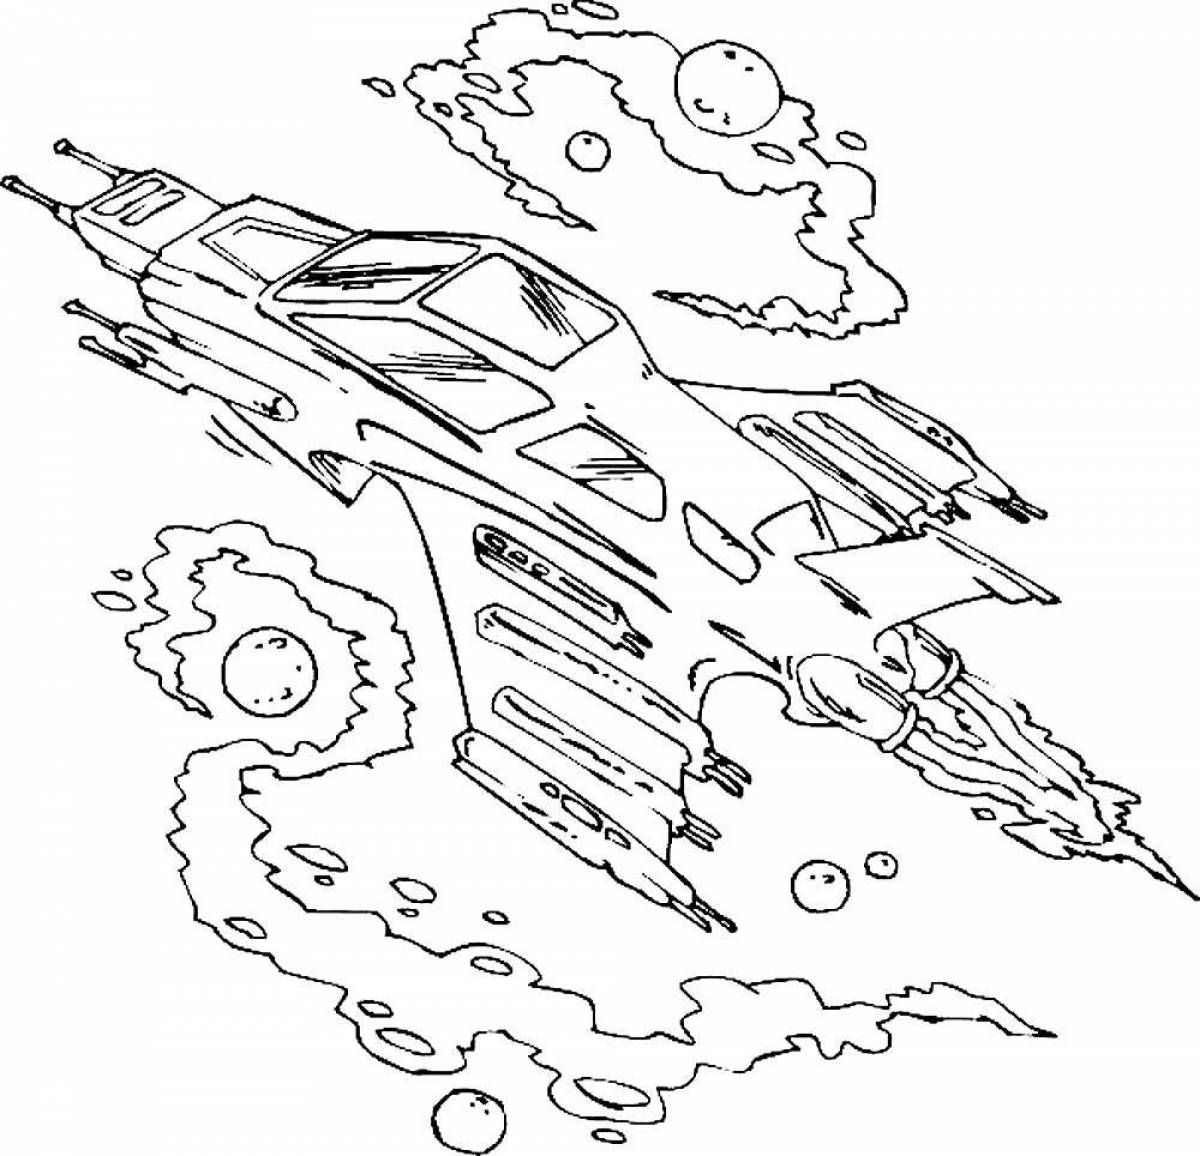 Coloring book spaceship from this world